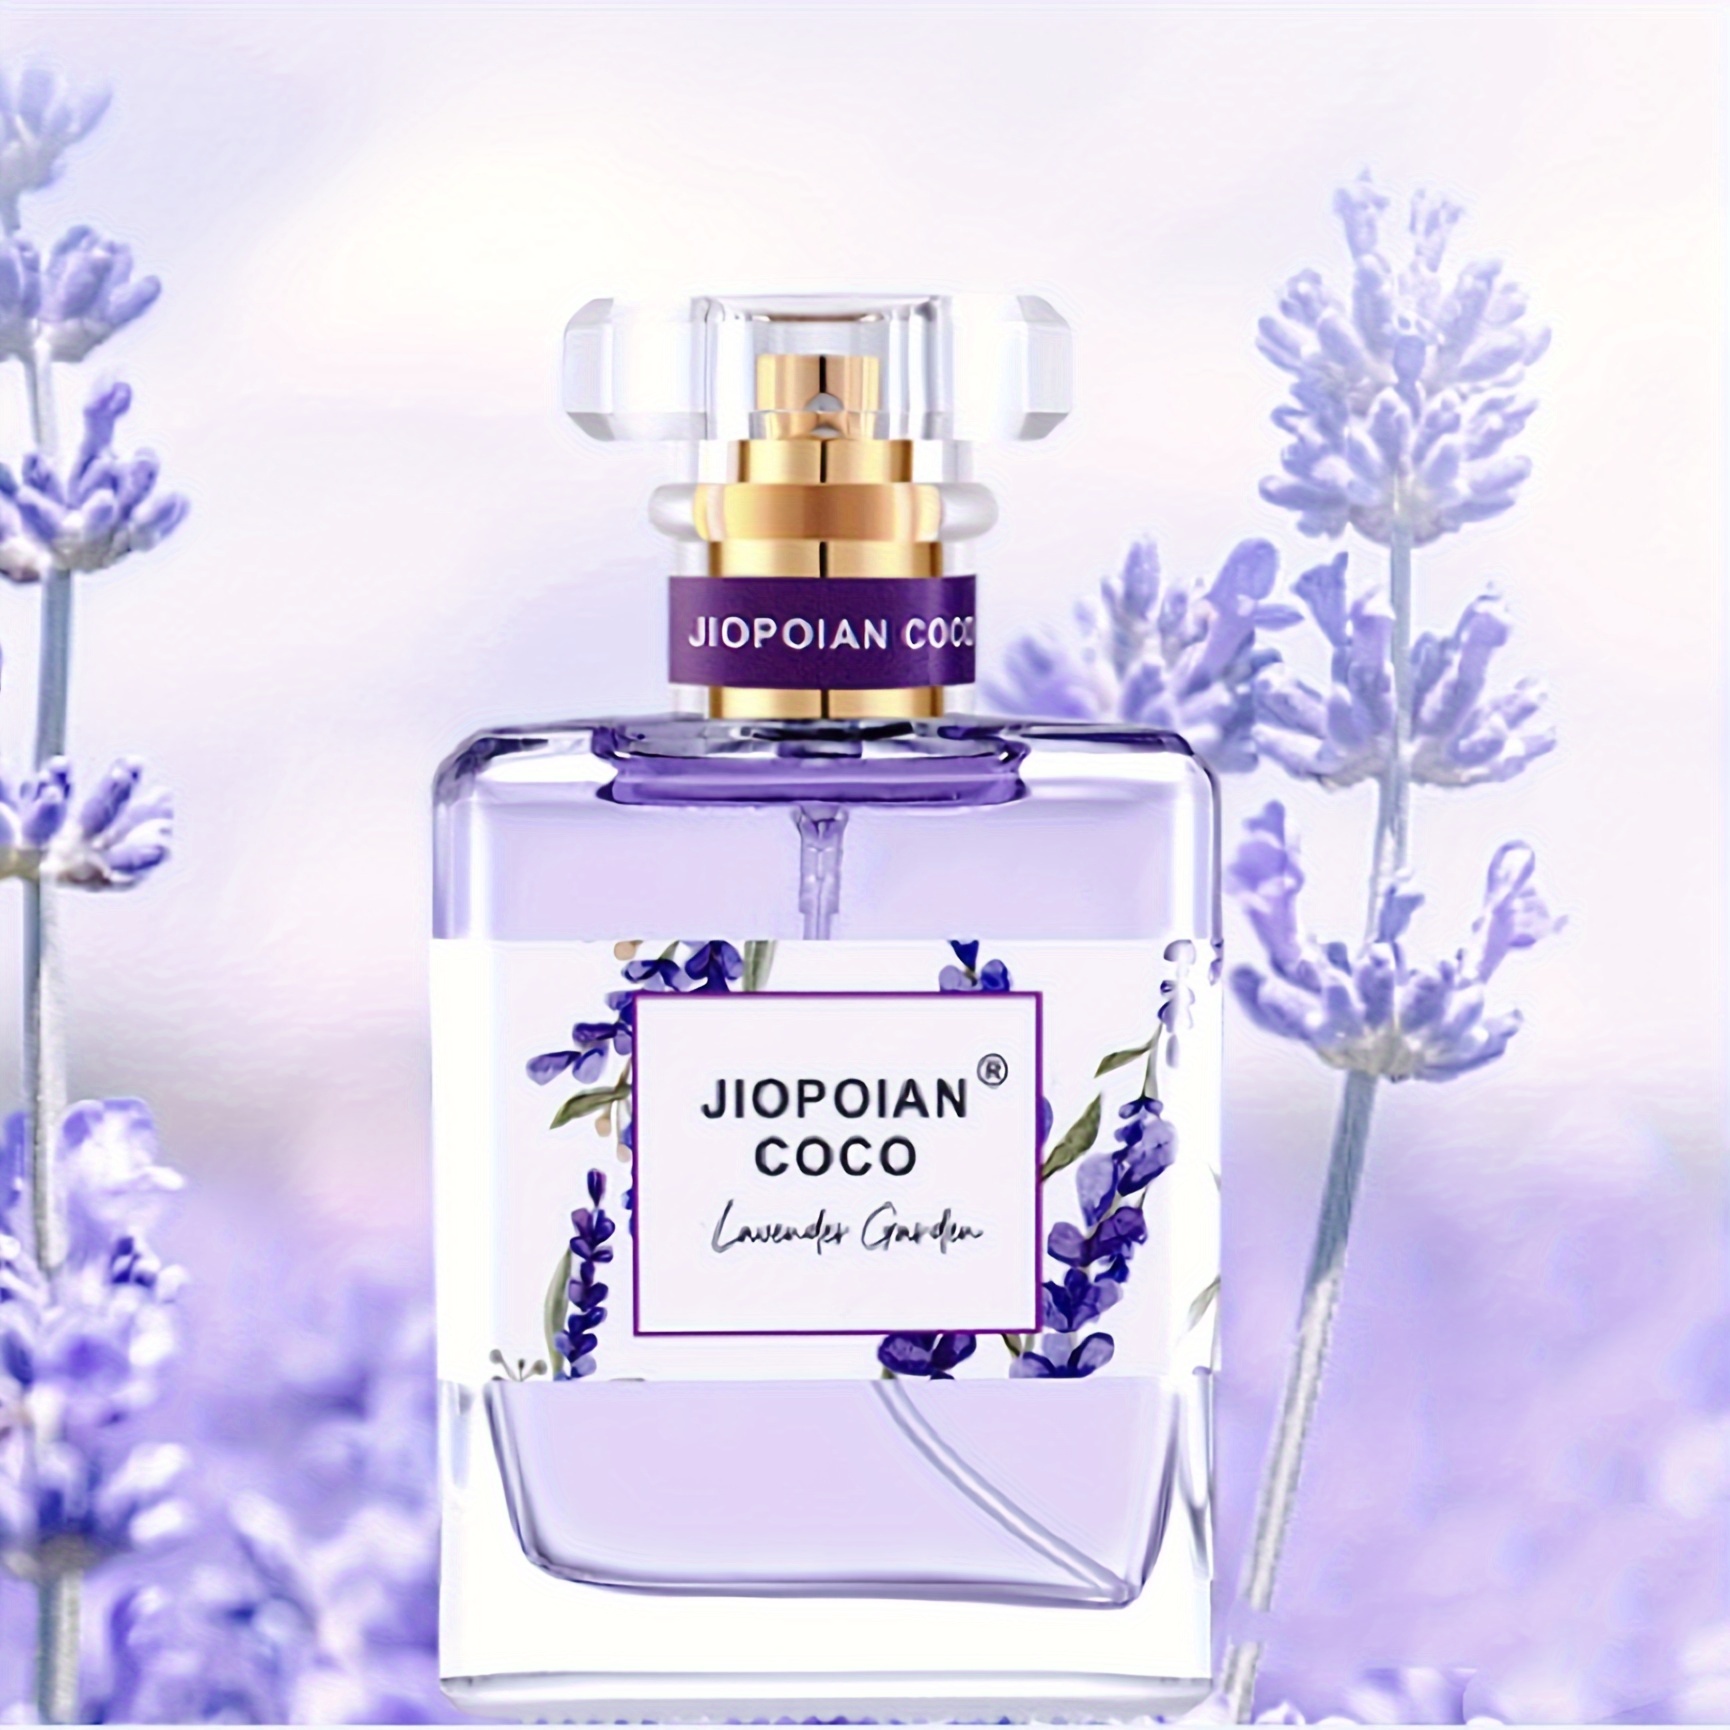 Floral Perfume Eau De Parfum For Women - Delicate, Floral Scent - Notes Of  Jasmine, Lavender, Lily, Rose, Gardenia &osmanthus - Feminine & Subtle,  Long Lasting. Travel Size,gifts For Mother's Day, Christmas